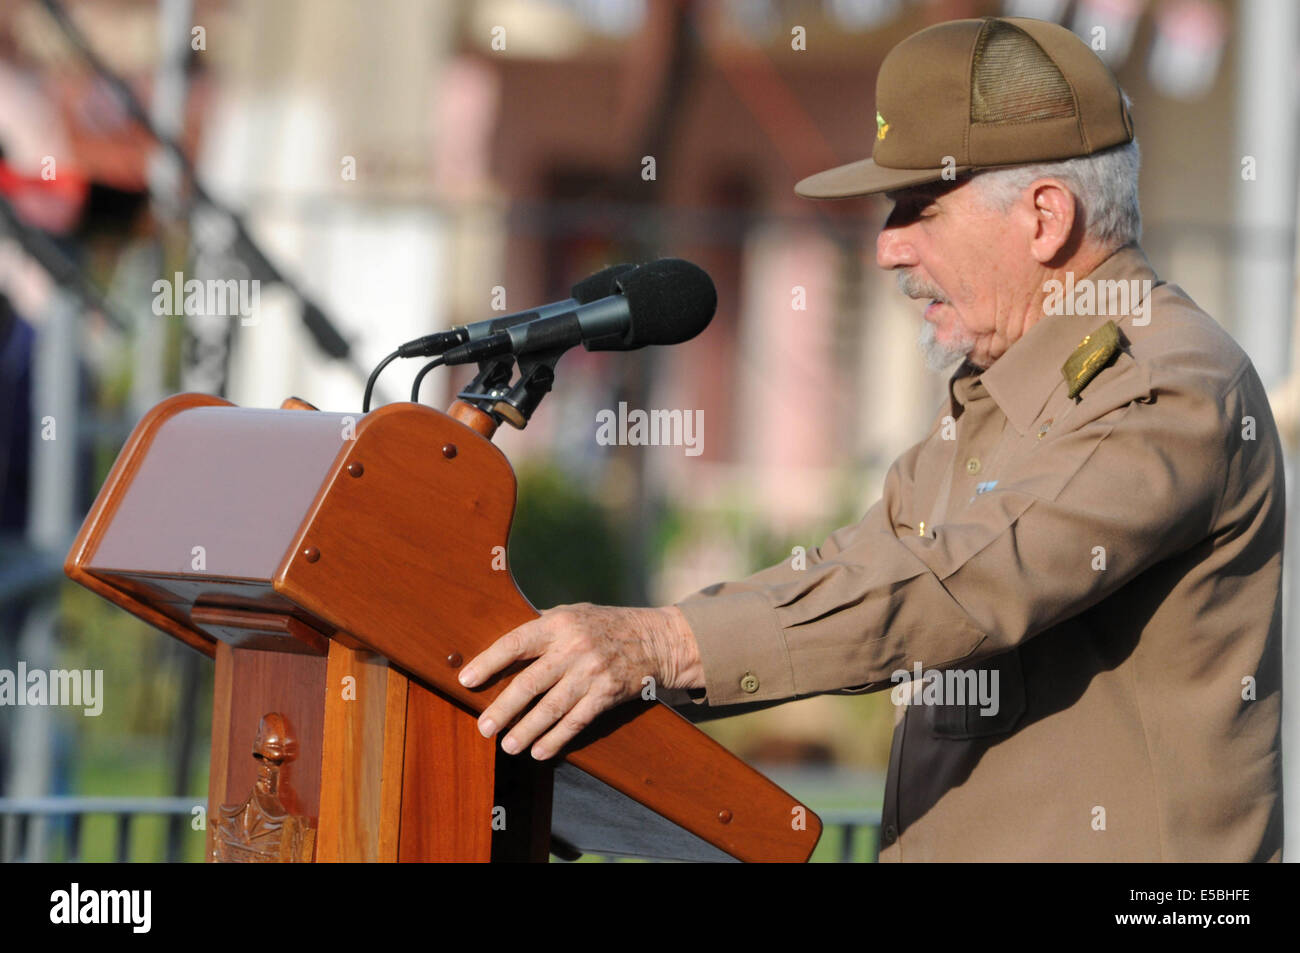 Artemisa, Cuba. 26th July, 2014. The Commander of the Cuba Revolution, Ramiro Valdes, delivers a speech during the commemoration of the National Rebellion Day, in the Mausoleum of the Martyrs, in Artemisa town, Havana Province, Cuba, on July 26, 2014. On July 26, 1953 was the beginning of the Cuban Revolution led by Fidel Castro. Credit:  Vladimir Molina/Prensa Latina/Xinhua/Alamy Live News Stock Photo